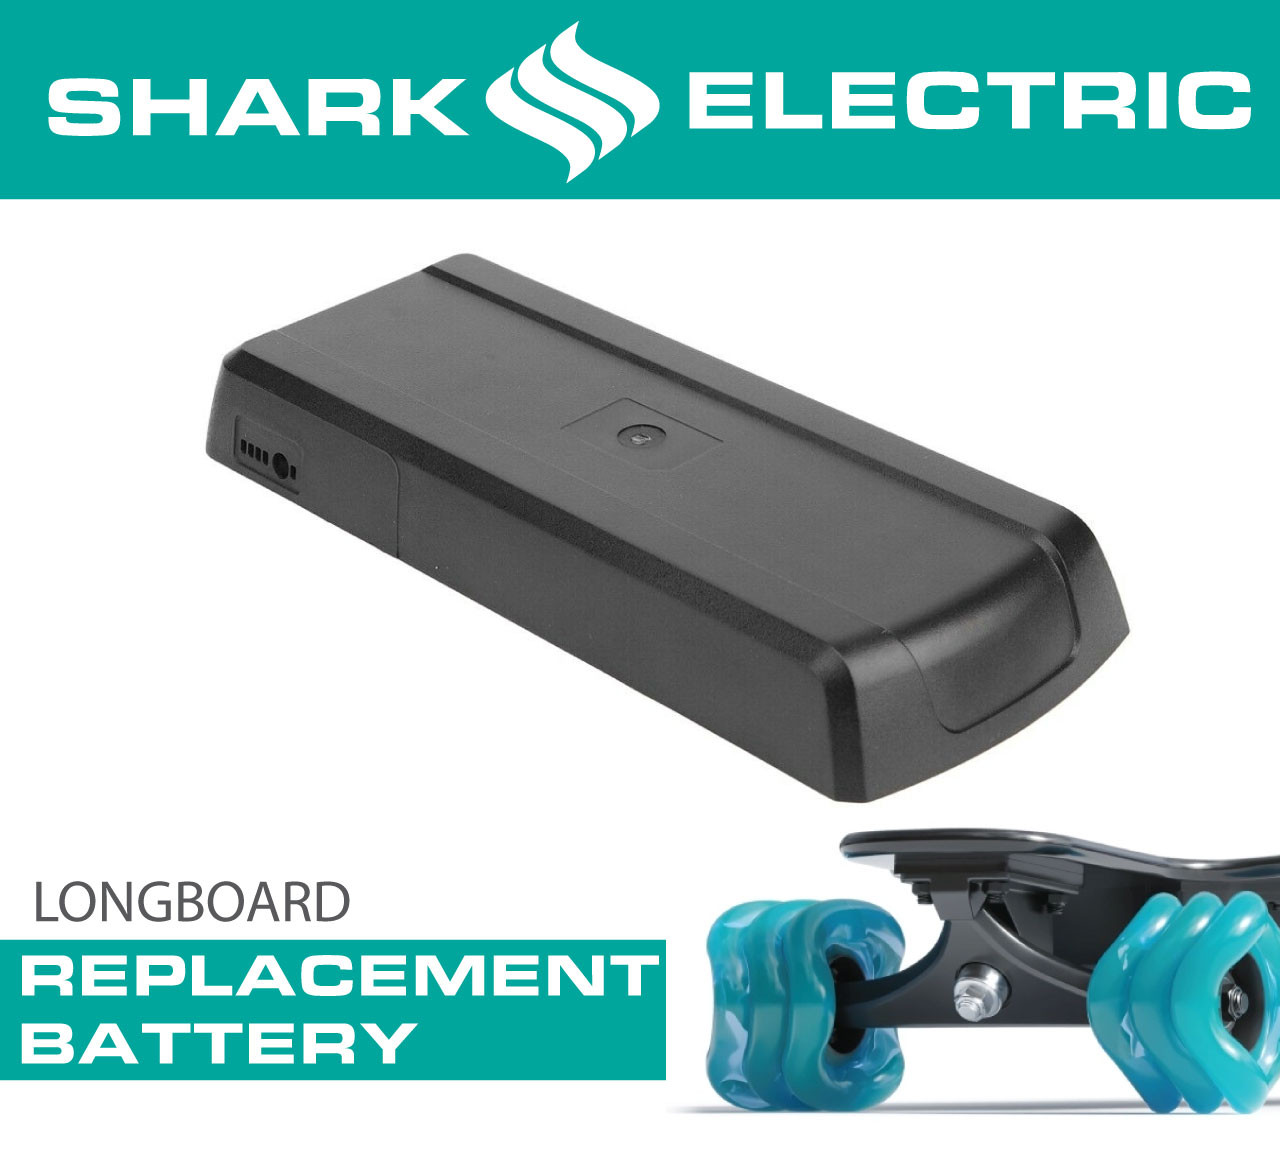 Battery Replacement for Shark Electric Recharge Longboard - Shark Wheel